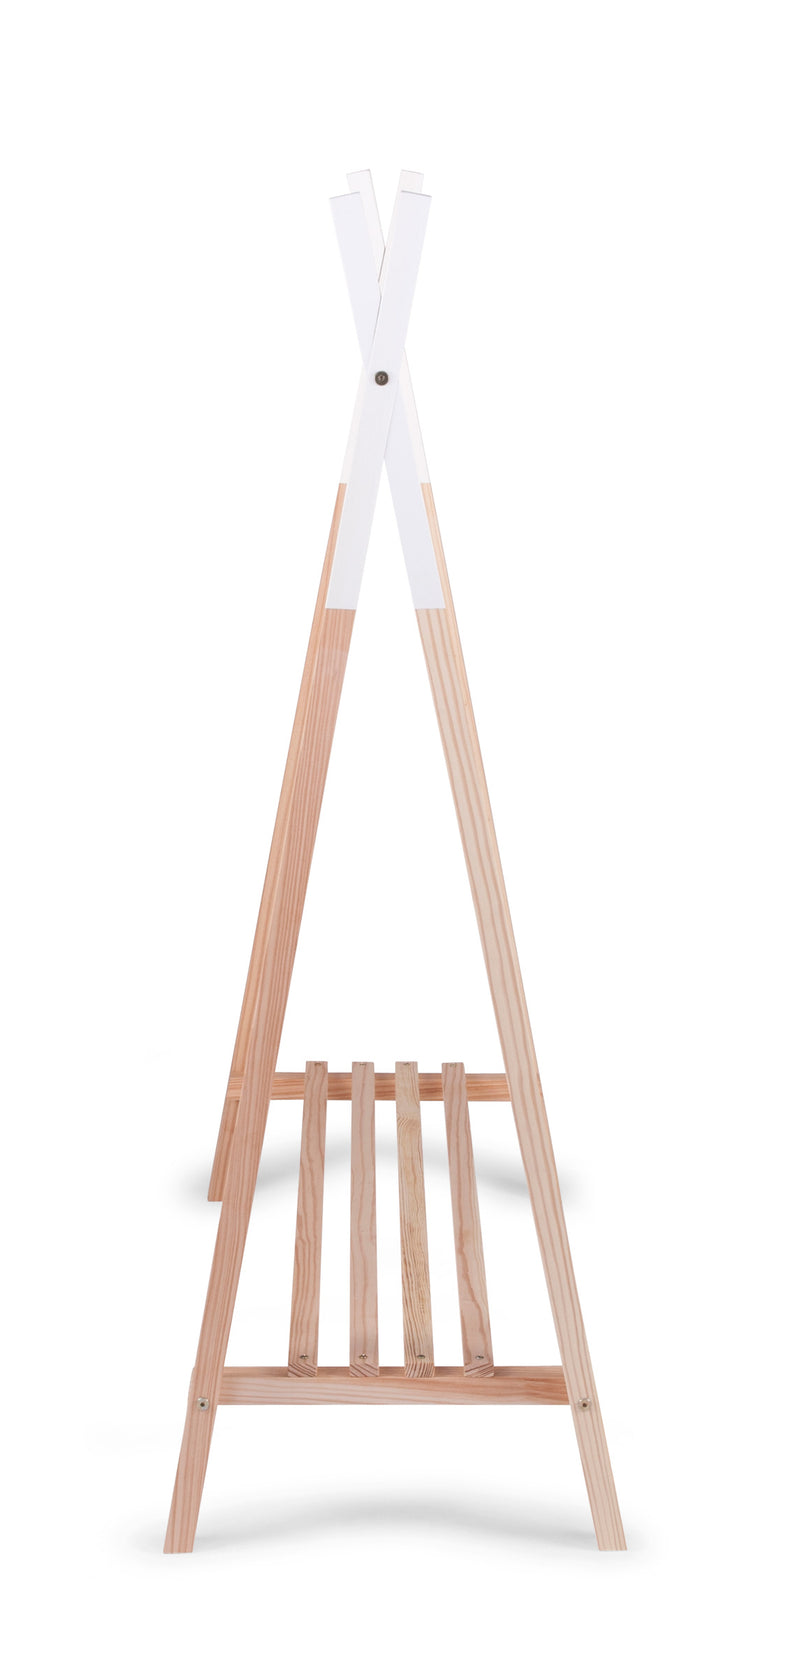 The side of the Childhome Tipi Open Clothes Rack | Clothes Racks, Wardrobes & Shelves | Storage Solutions | Nursery Furniture - Clair de Lune UK